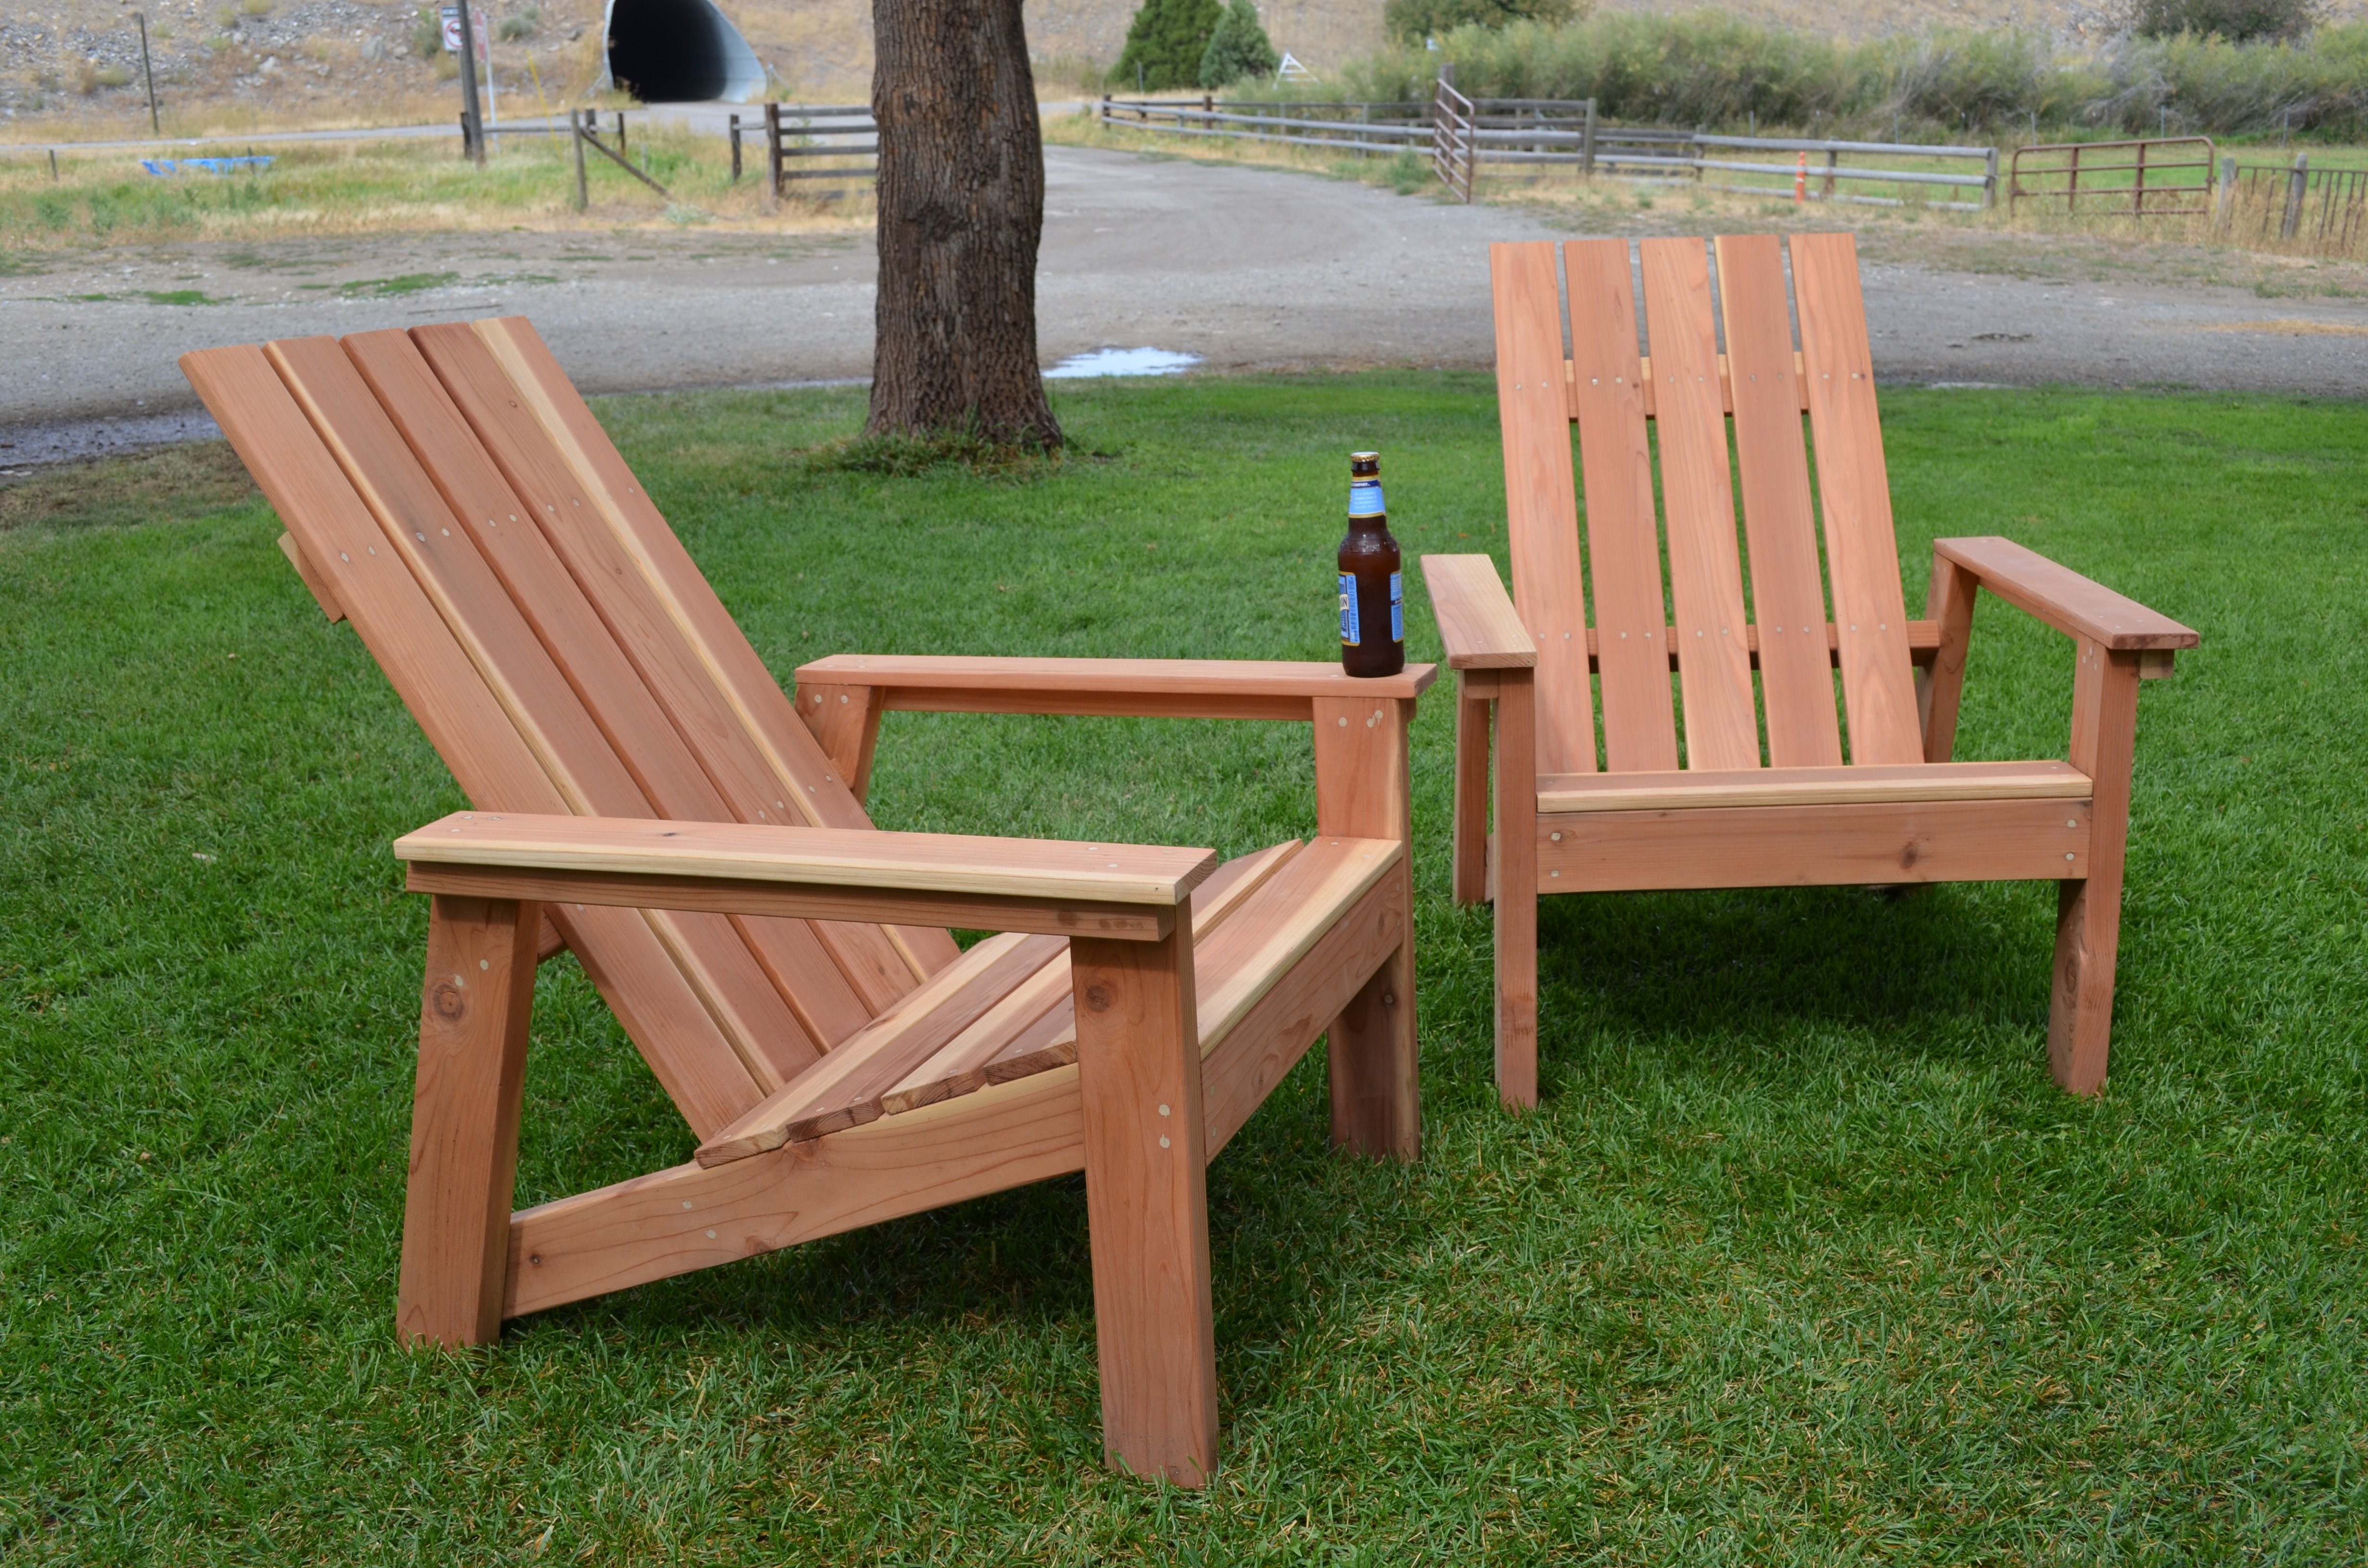 First Build - Redwood Adirondack Chairs | Do It Yourself Home Projects ...